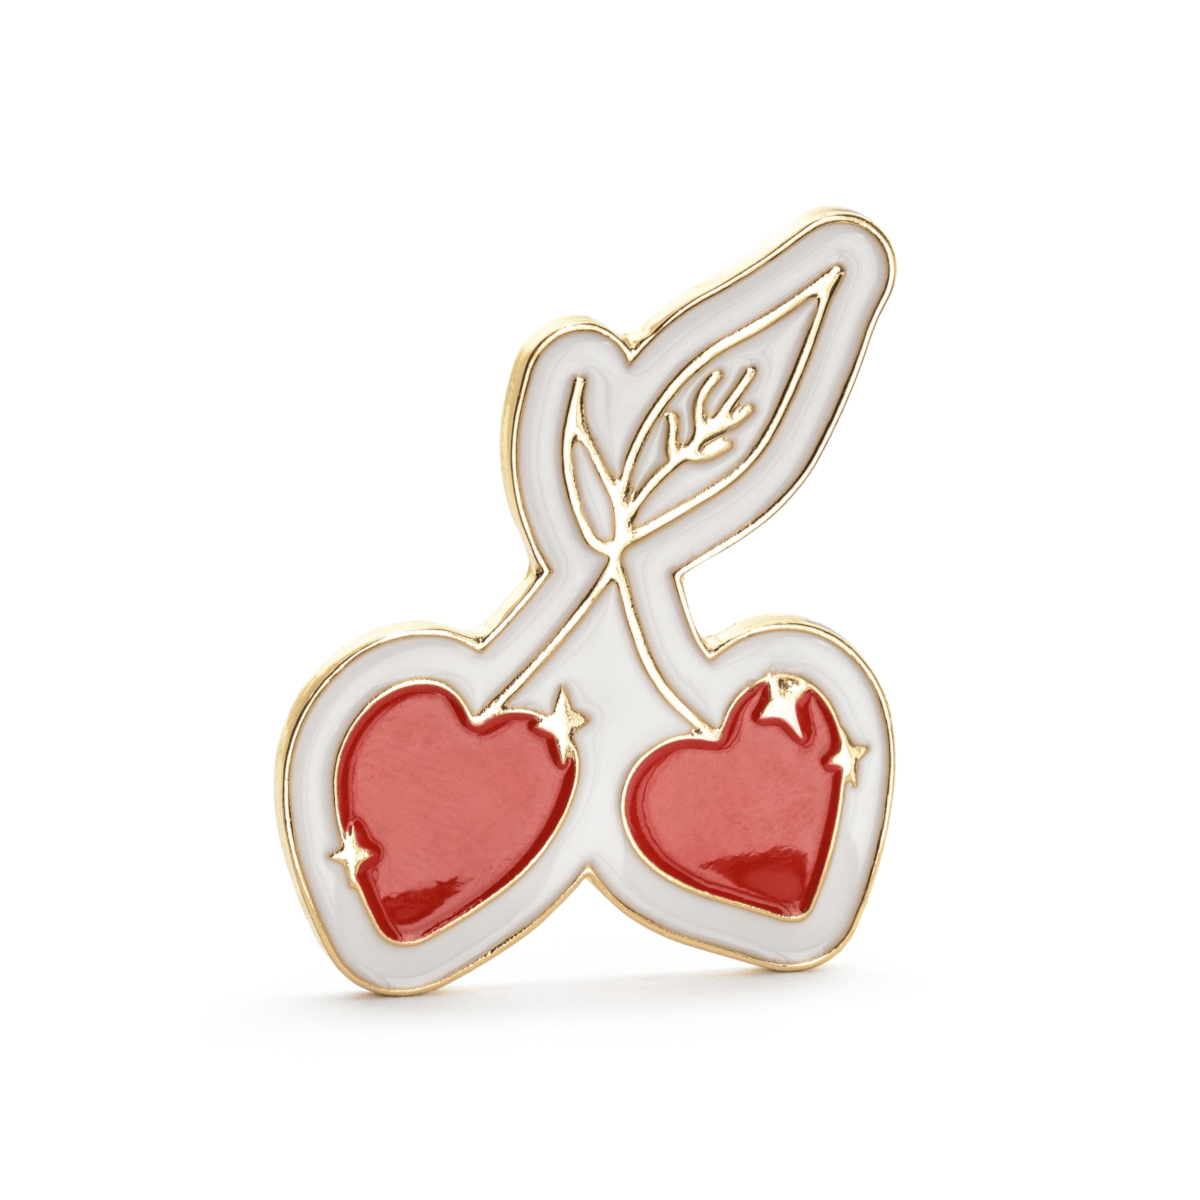 Enamel Pin Cherries | Cherry Pin Badge | Party Bag Fillers Party Deco